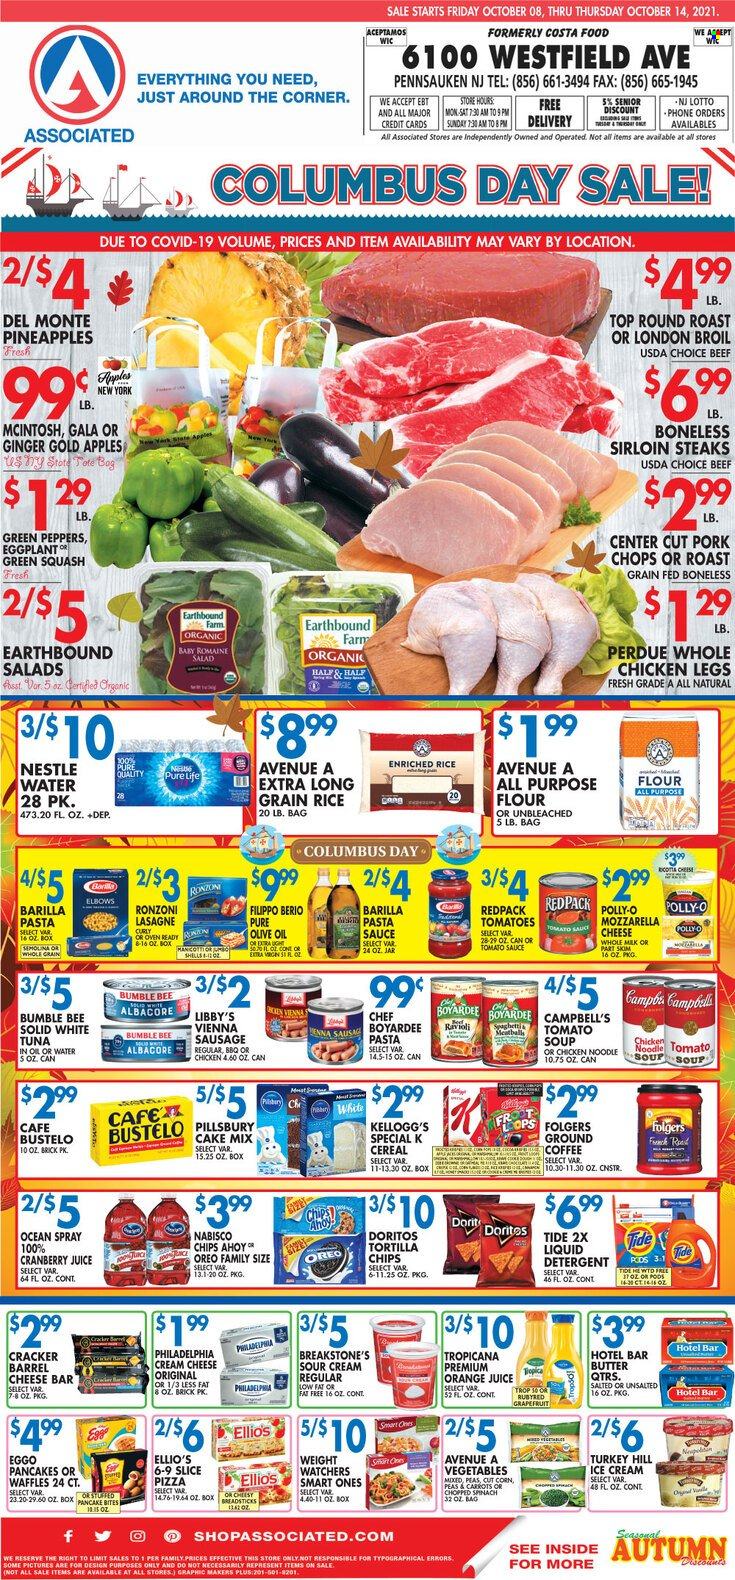 thumbnail - Associated Supermarkets Flyer - 10/08/2021 - 10/14/2021 - Sales products - waffles, cake mix, carrots, corn, ginger, zucchini, eggplant, apples, Gala, pineapple, tuna, Campbell's, ravioli, tomato soup, pizza, pasta sauce, soup, Bumble Bee, sauce, Pillsbury, Barilla, noodles, Perdue®, sausage, vienna sausage, cream cheese, Philadelphia, Oreo, butter, sour cream, ice cream, Nestlé, crackers, Kellogg's, Doritos, tortilla chips, chips, all purpose flour, tomato sauce, cereals, rice, long grain rice, olive oil, oil, cranberry juice, orange juice, juice, coffee, Folgers, ground coffee, whole chicken, chicken legs, beef meat, steak, round roast, sirloin steak, pork chops, pork meat, detergent, Tide, liquid detergent. Page 1.